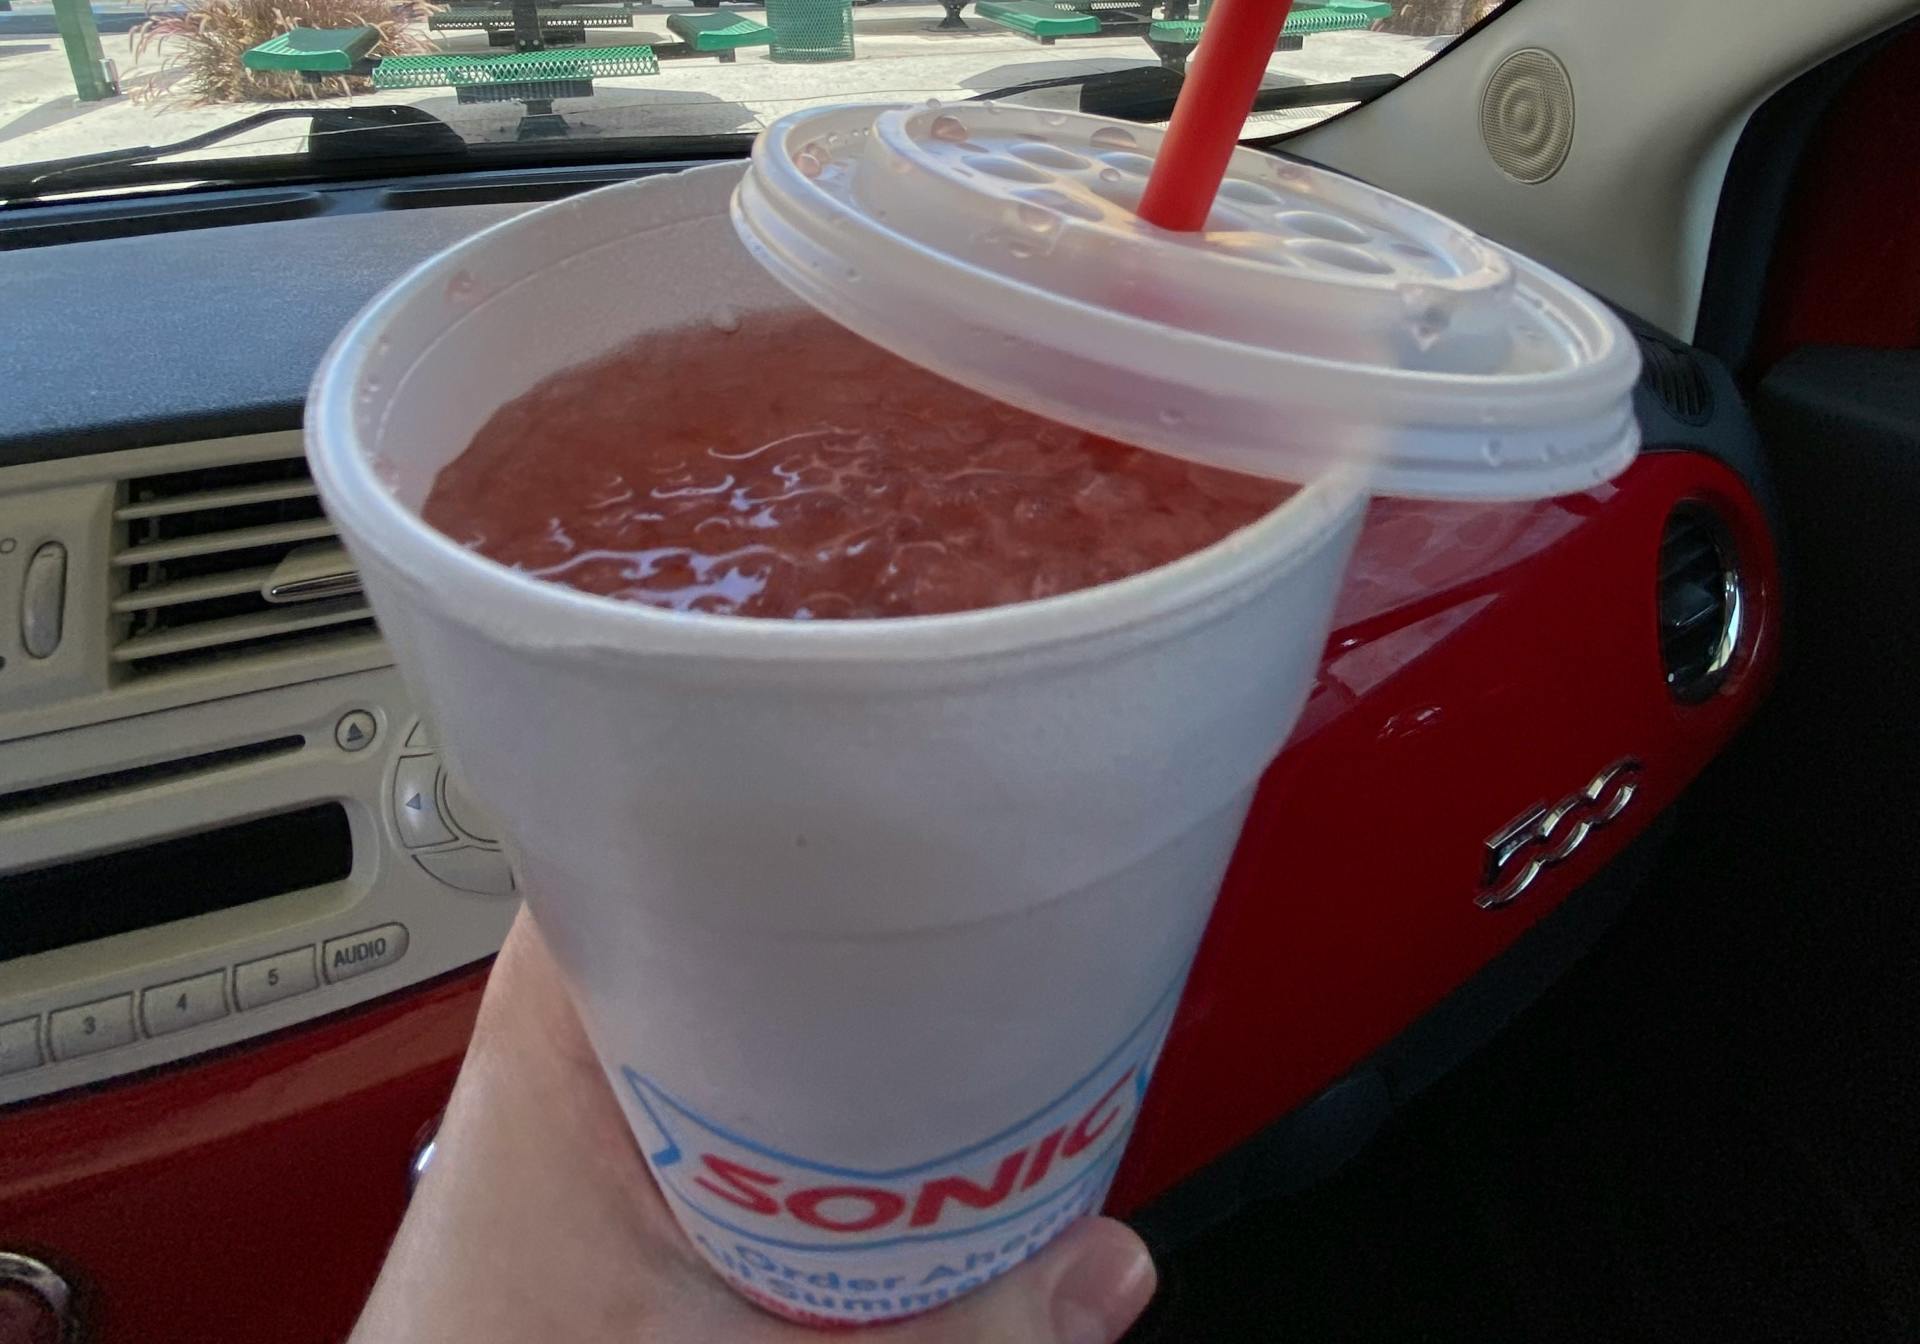 A person's hand holding a Sonic drink cup with the lid removed to show the drink.